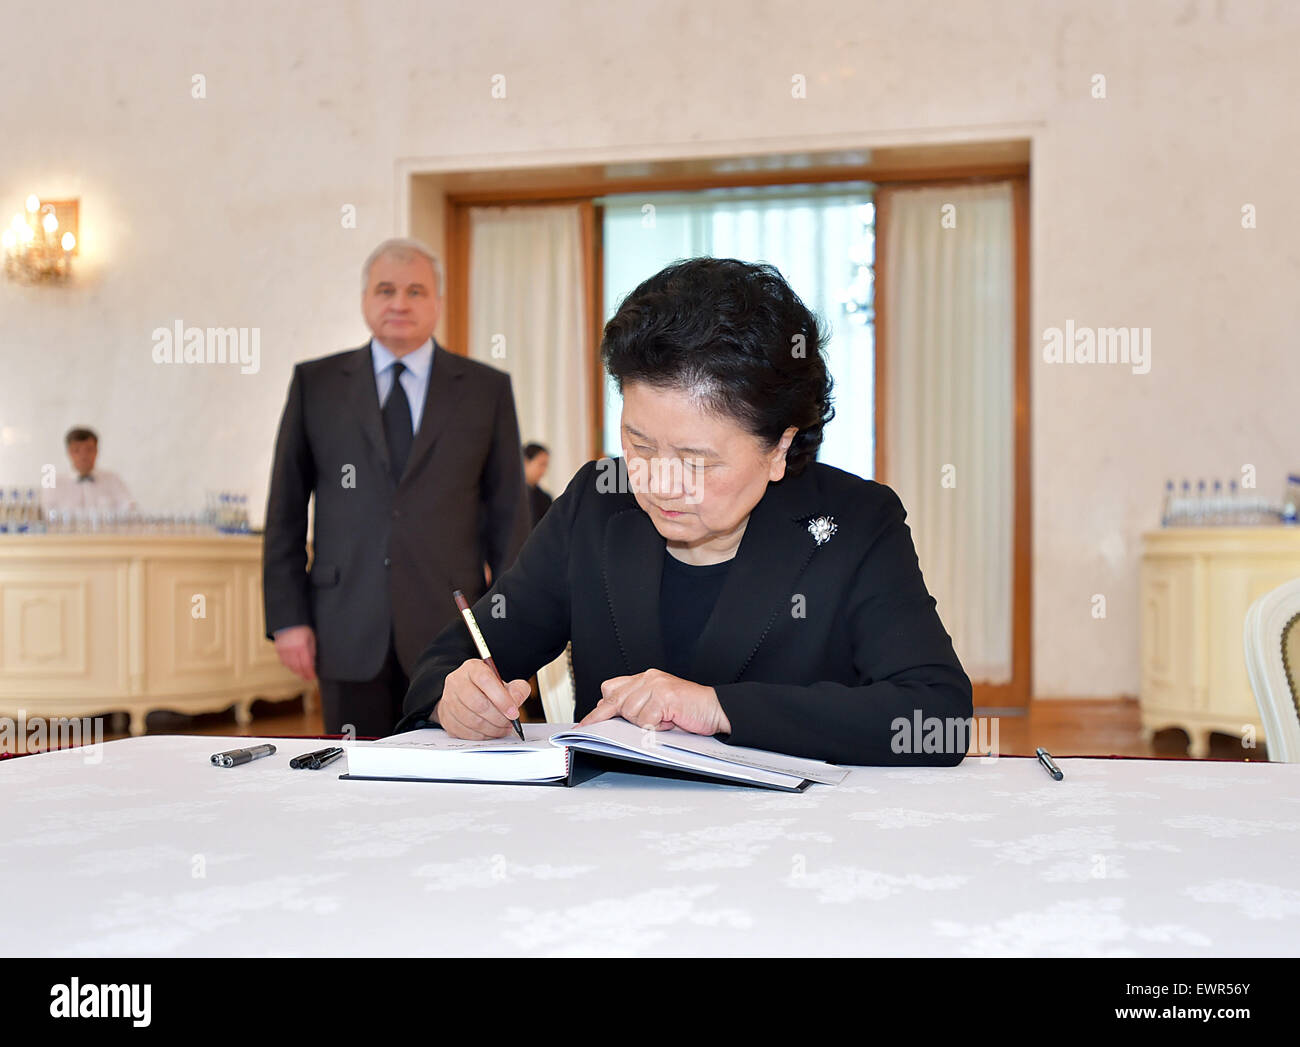 Beijing, China. 30th June, 2015. Chinese Vice Premier Liu Yandong (front) signs on a condolence book during a ceremony to mourn the passing of former Russian Prime Minister Yevgeny Primakov at the Russian embassy in Beijing, capital of China, June 30, 2015. © Li Tao/Xinhua/Alamy Live News Stock Photo